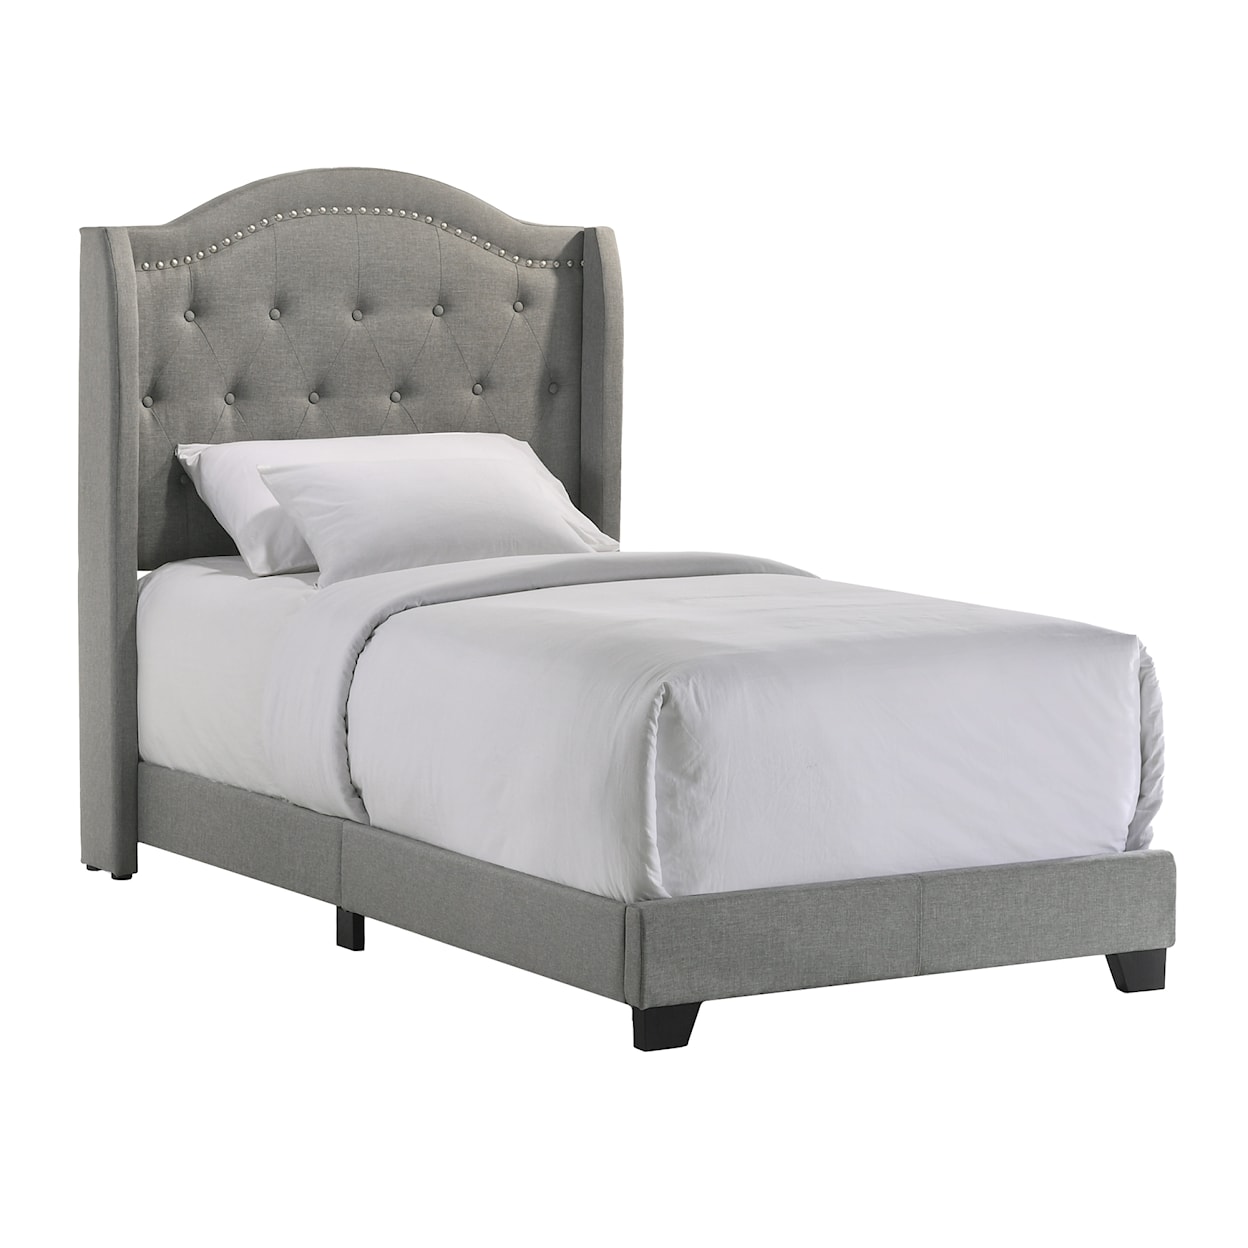 Intercon Upholstered Beds Rhyan Twin Upholstered Bed